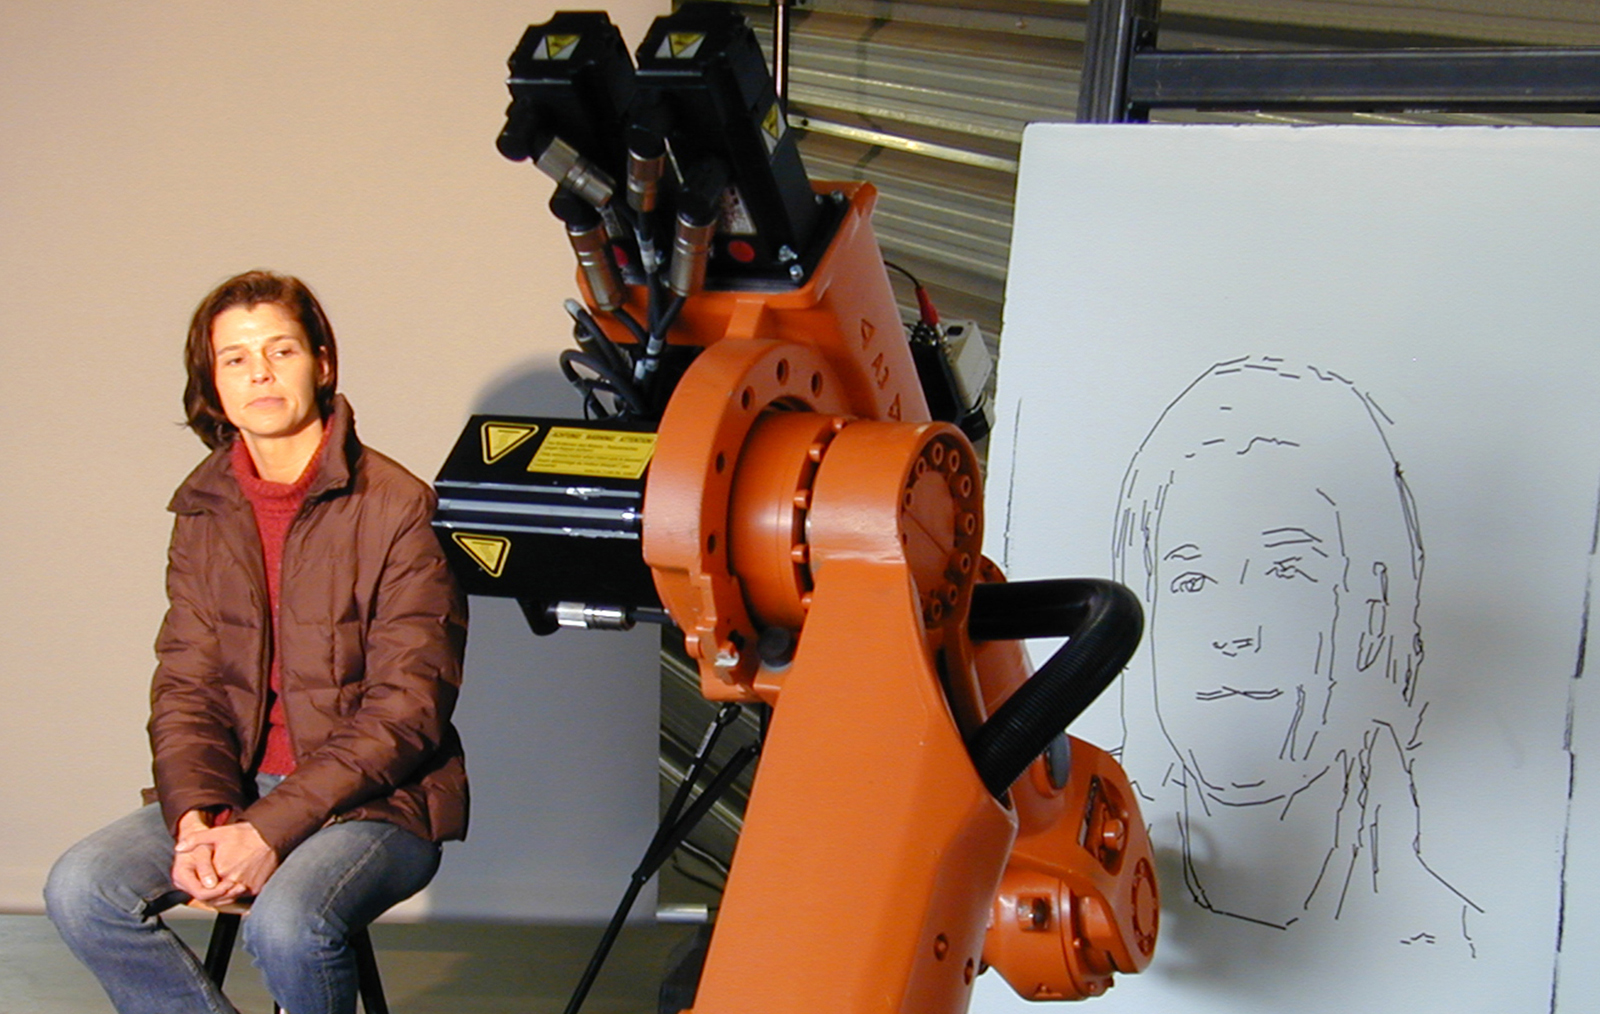 Picture: The industrial robot sketches a portrait